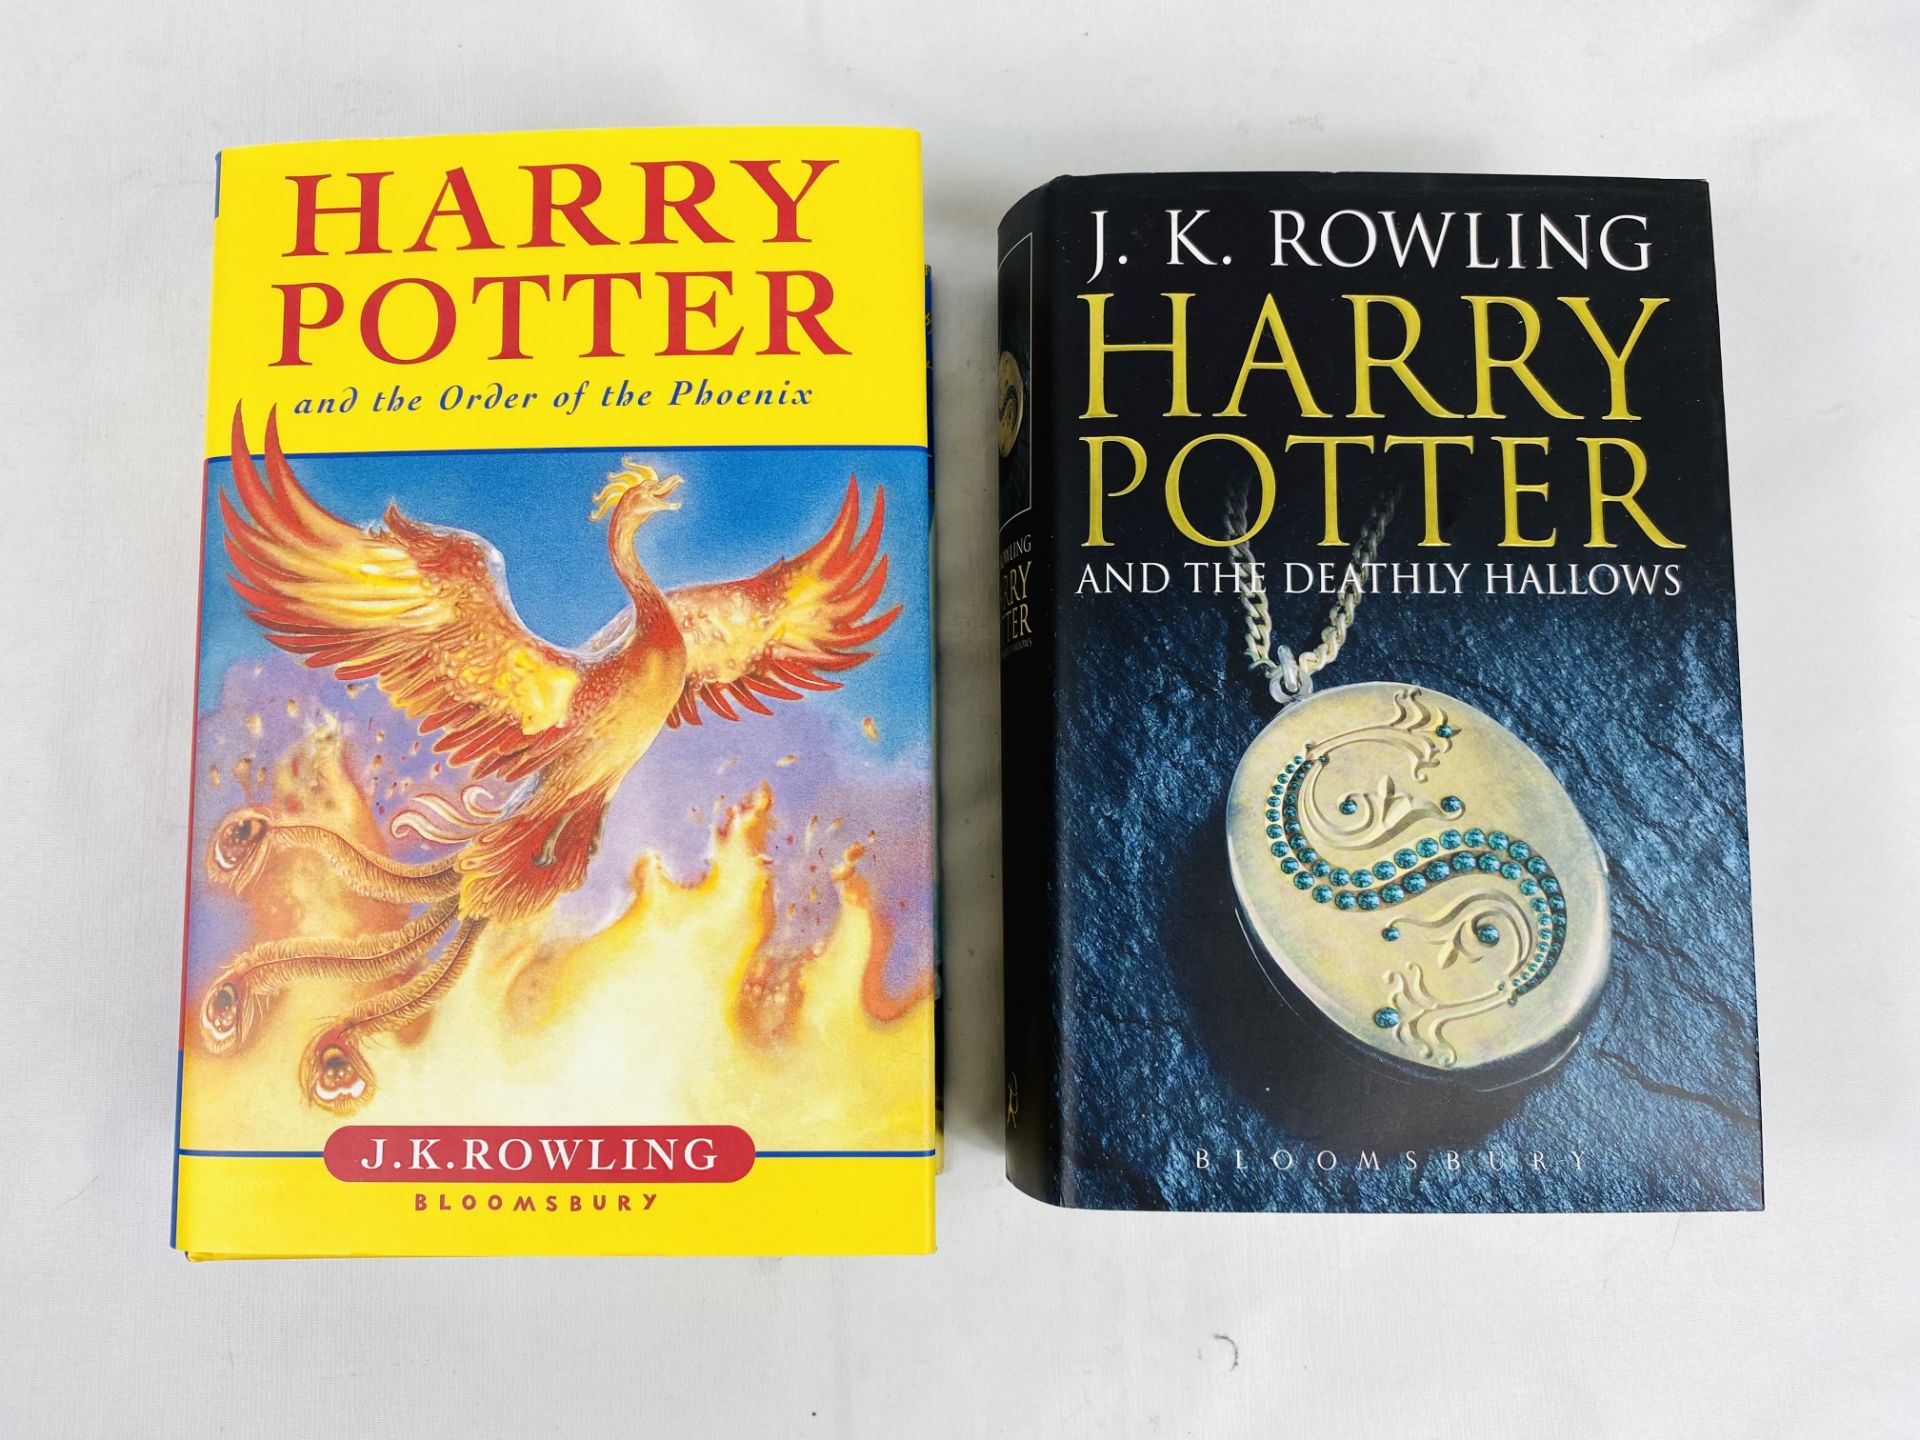 First edition copy of Harry Potter and the Order of the Phoenix and Deathly Hallows